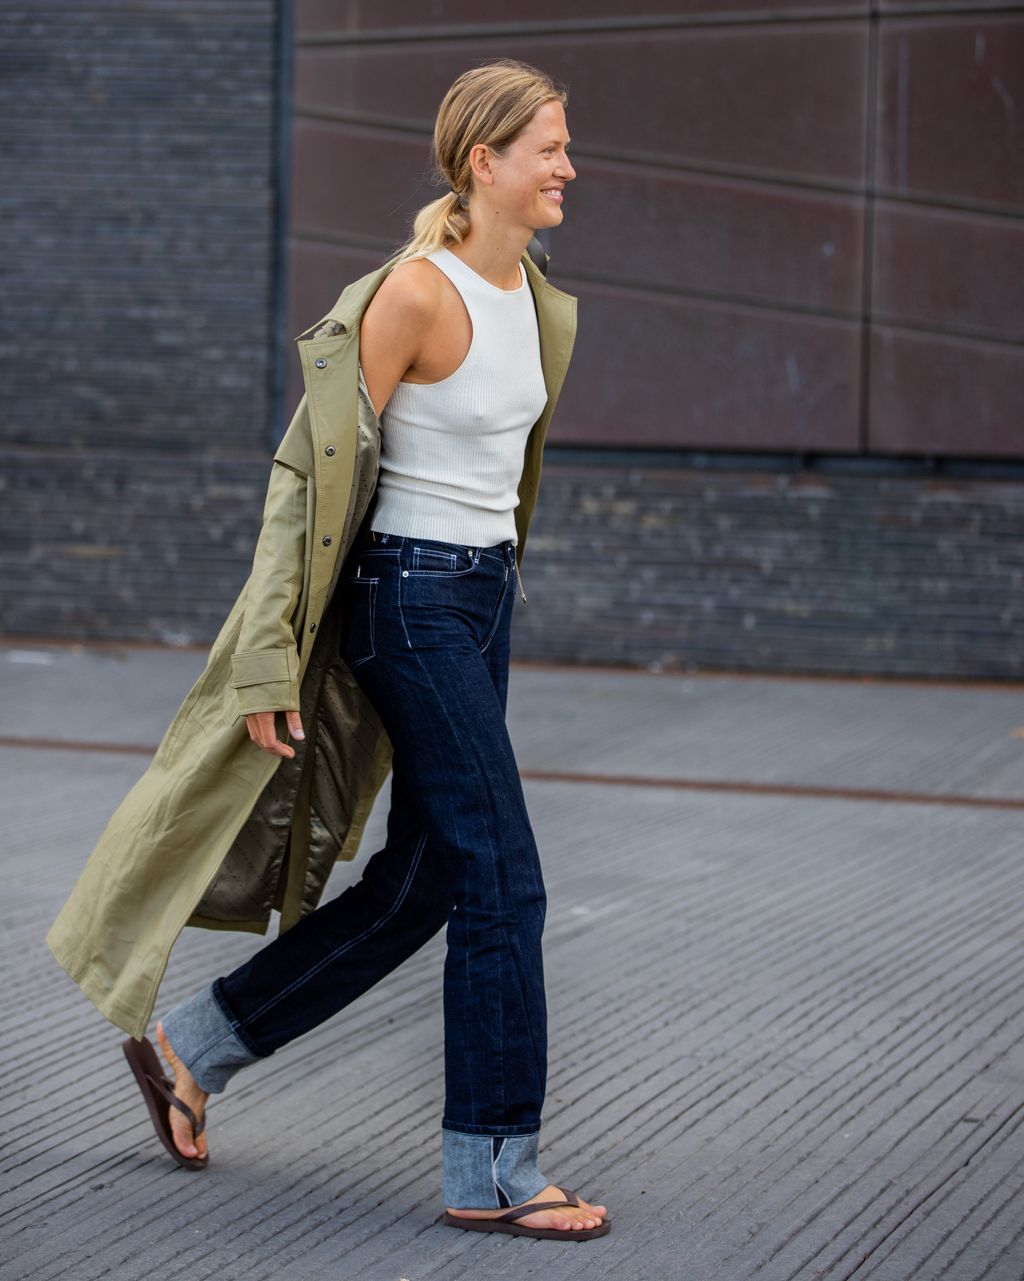 13 Stylish Outfit Ideas With Cuffed Jeans to Try This Season | Who What ...